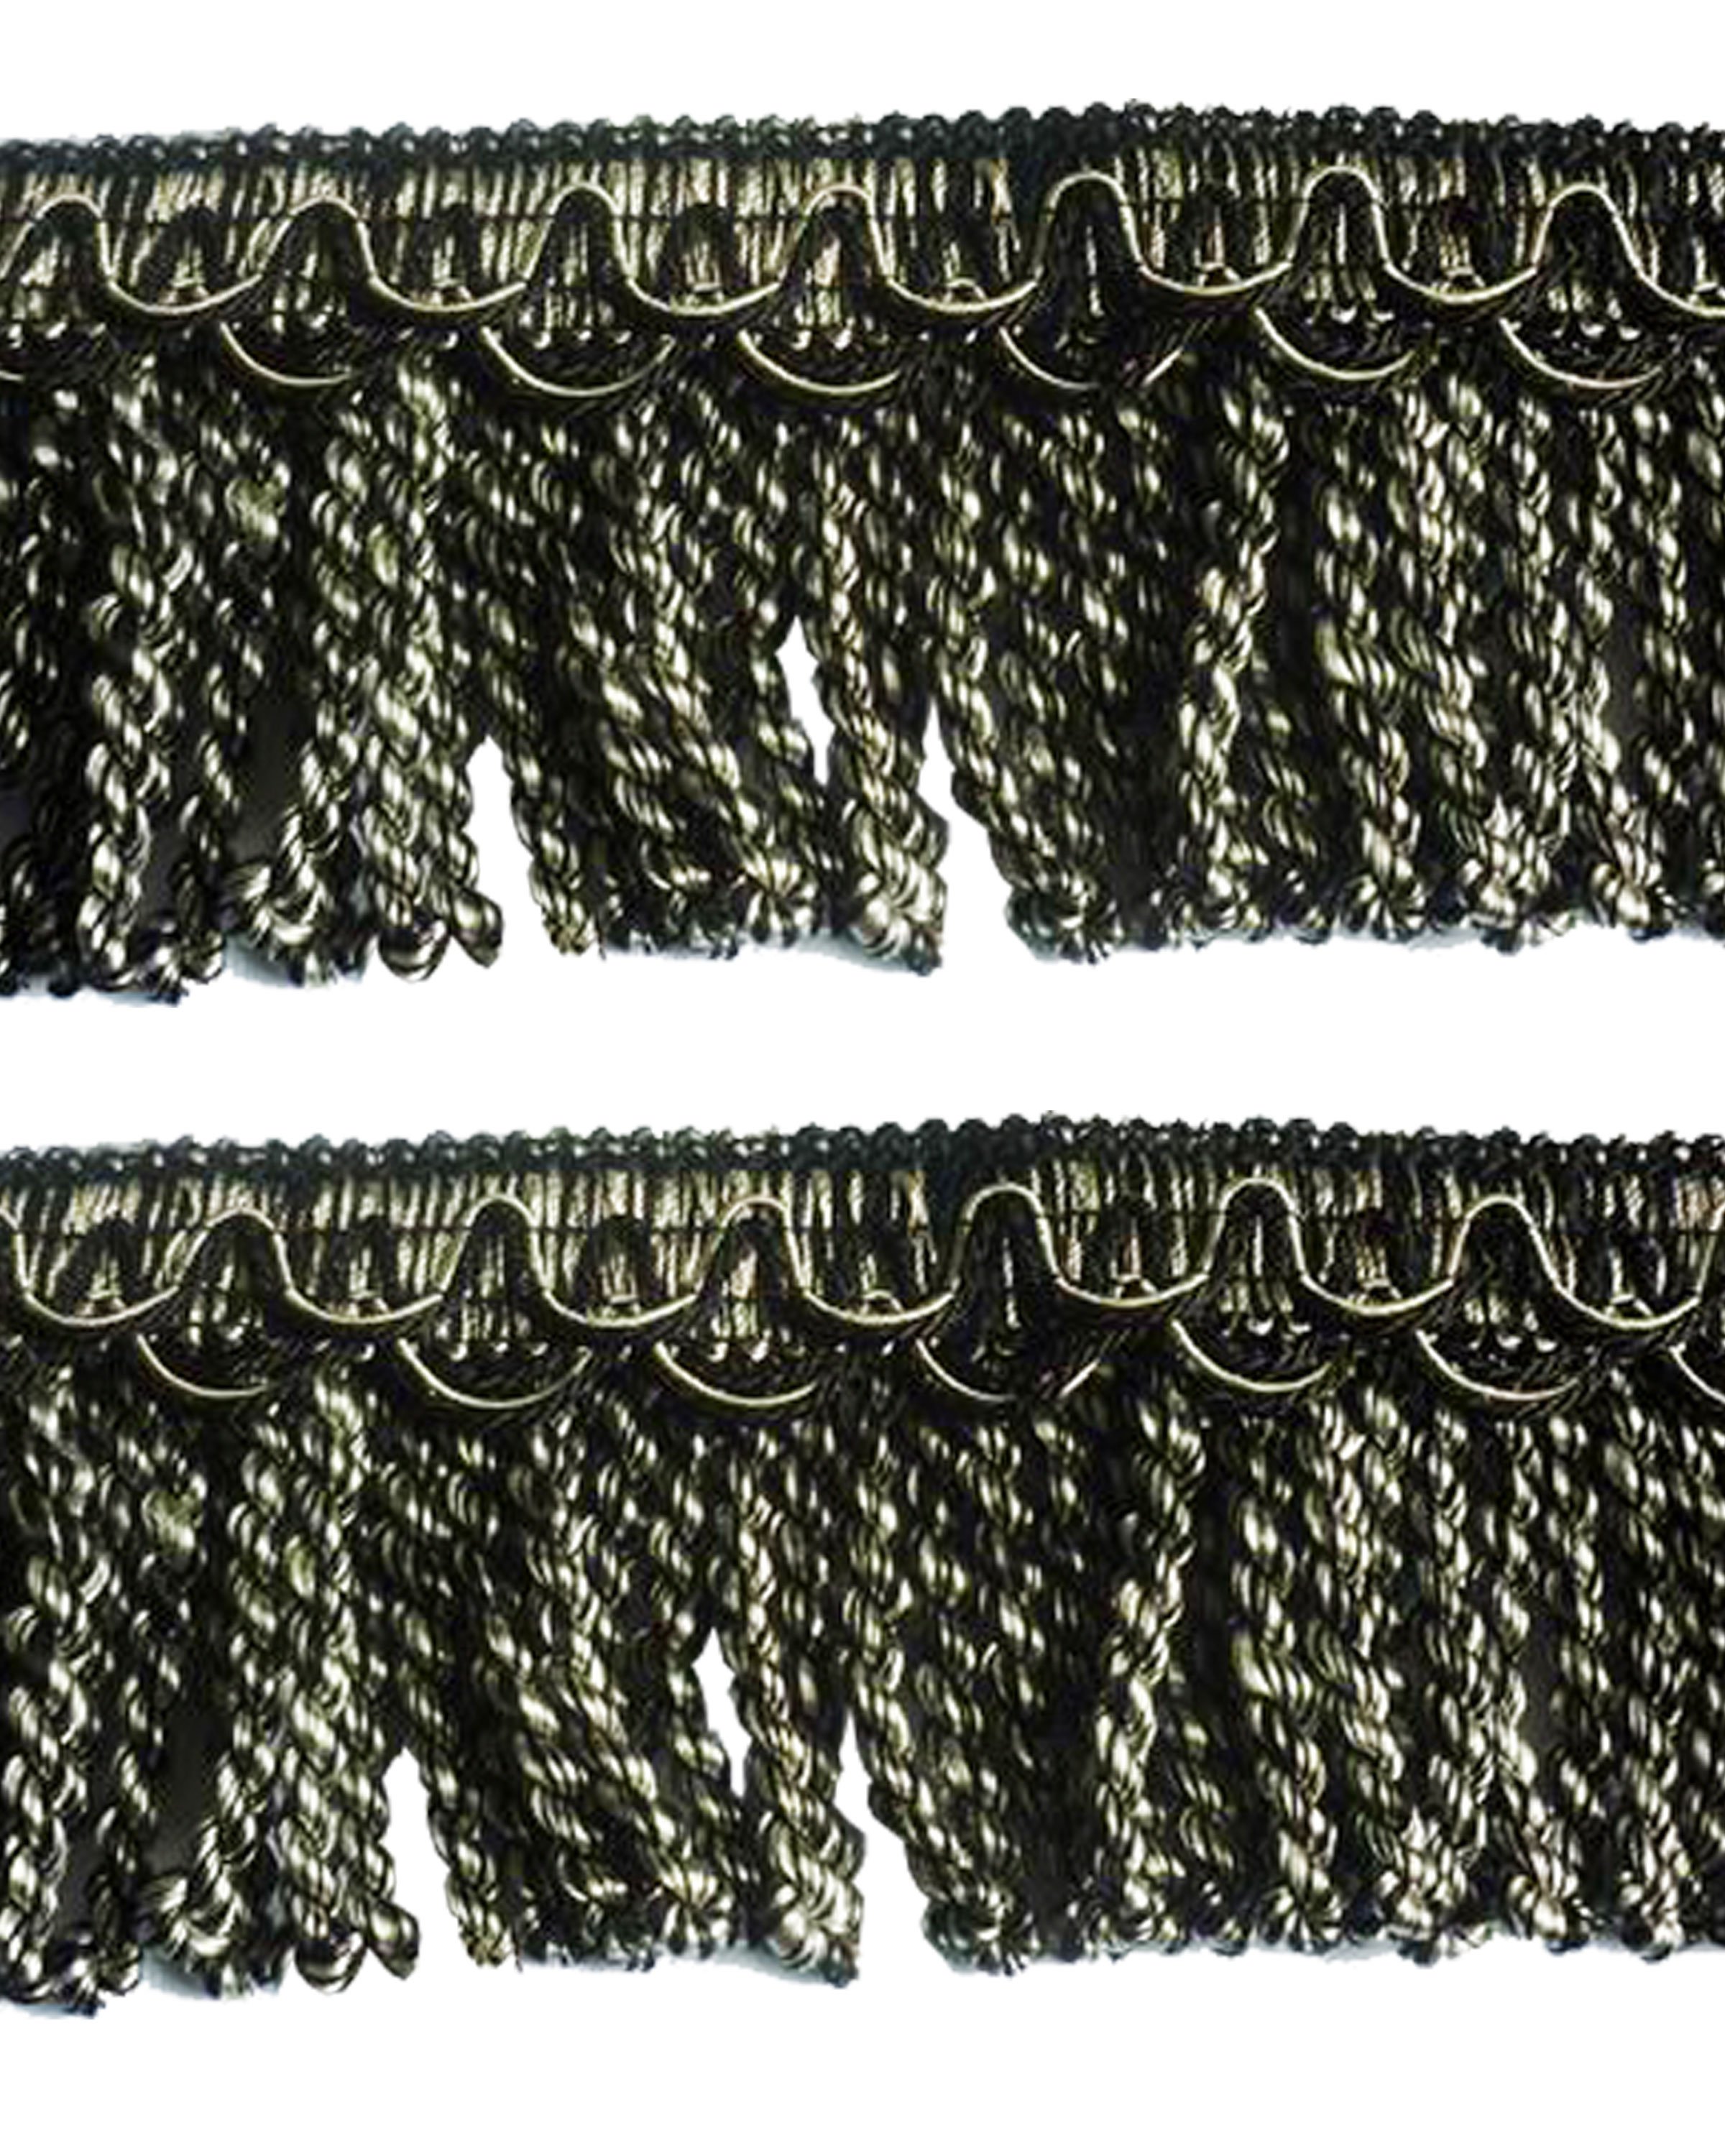 Bullion Cord Fringe on Braid - Black / Silver 80mm Price is for 5 metres 